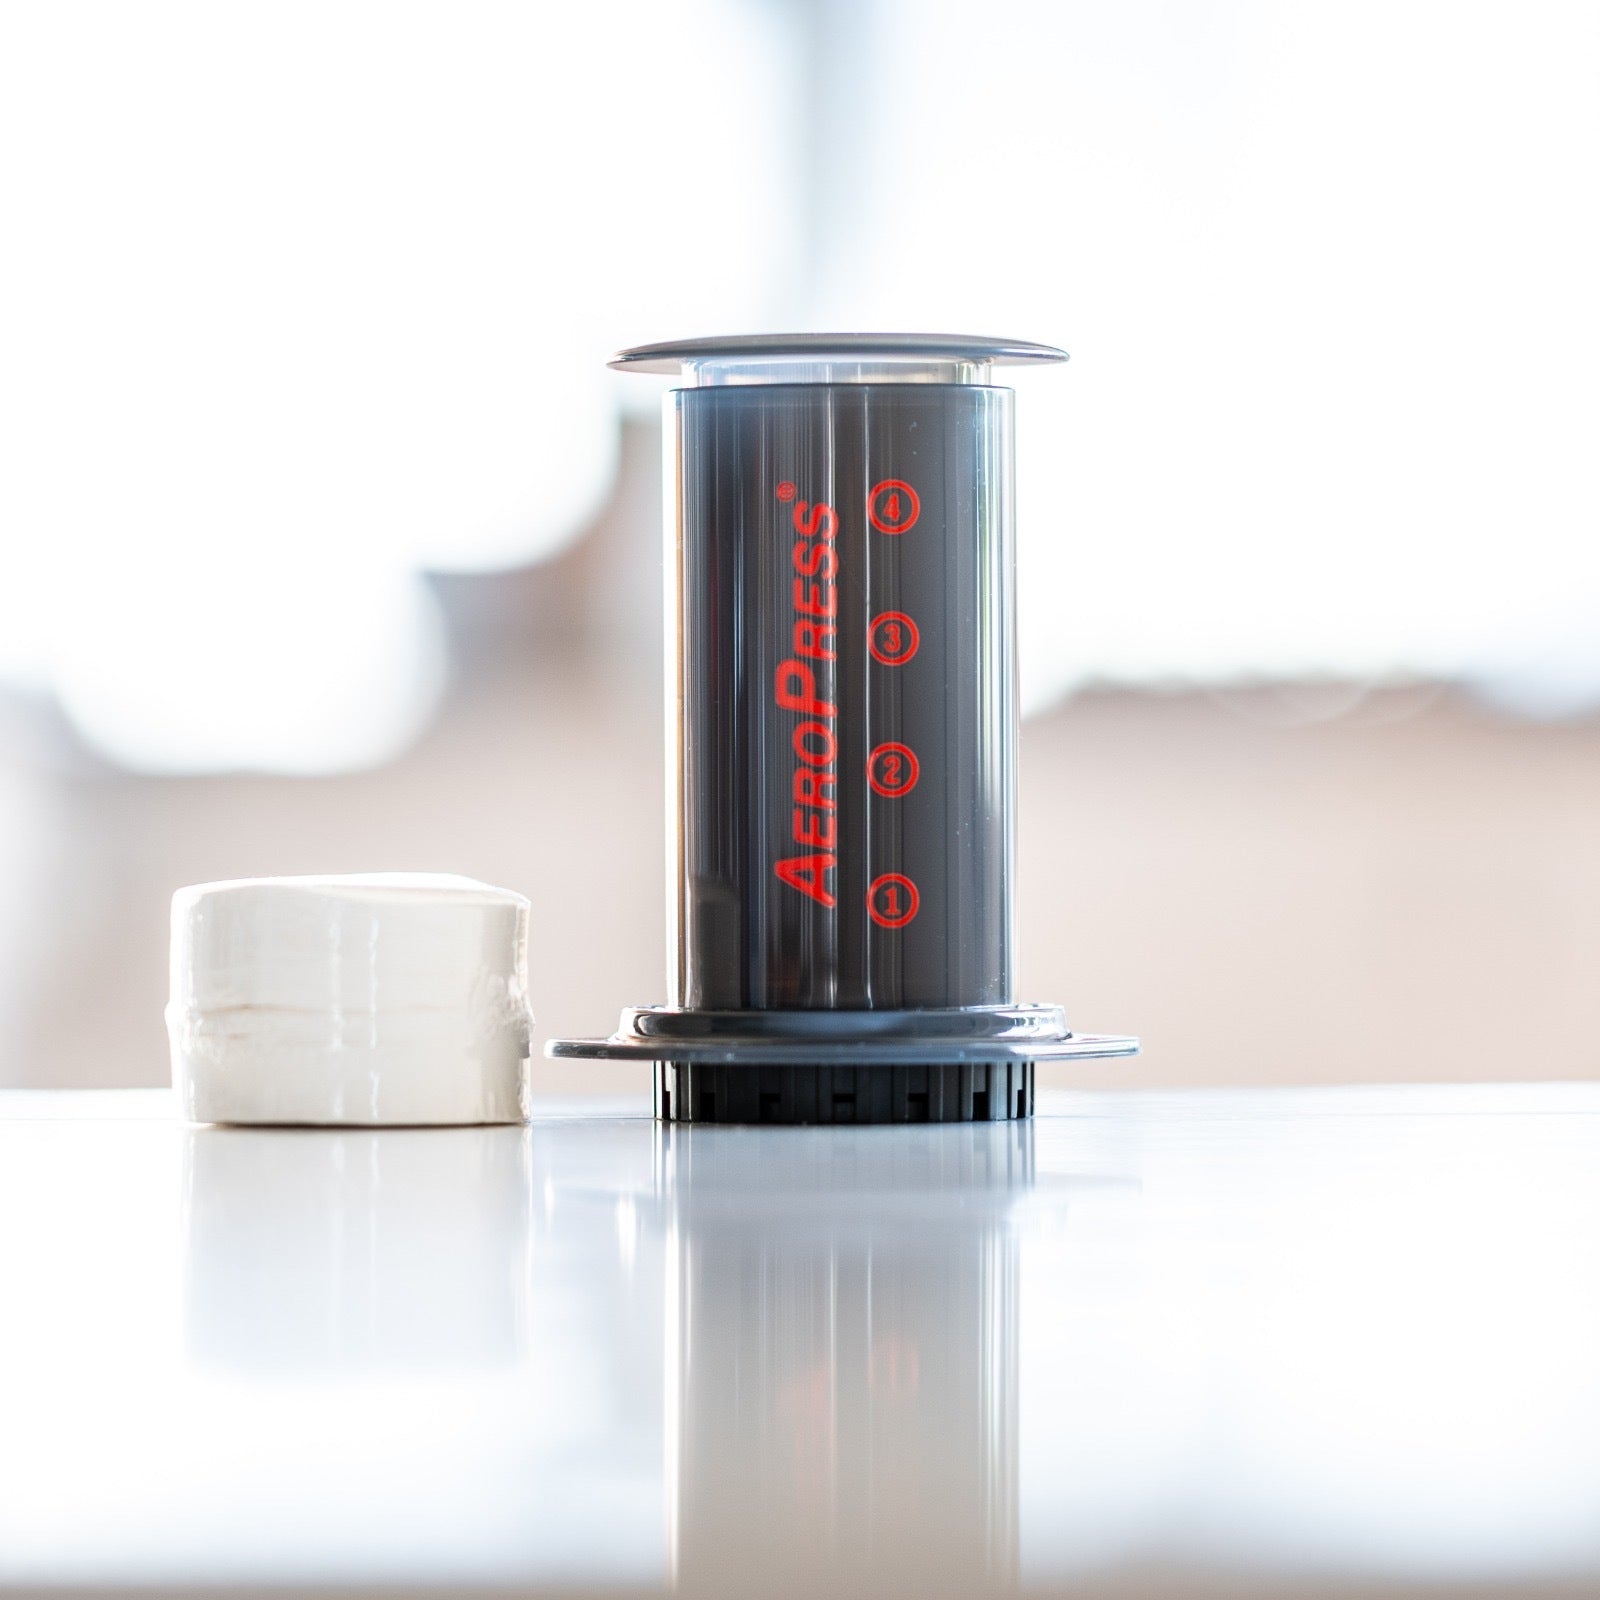 Aeropress and Filters by JAndersson Photography